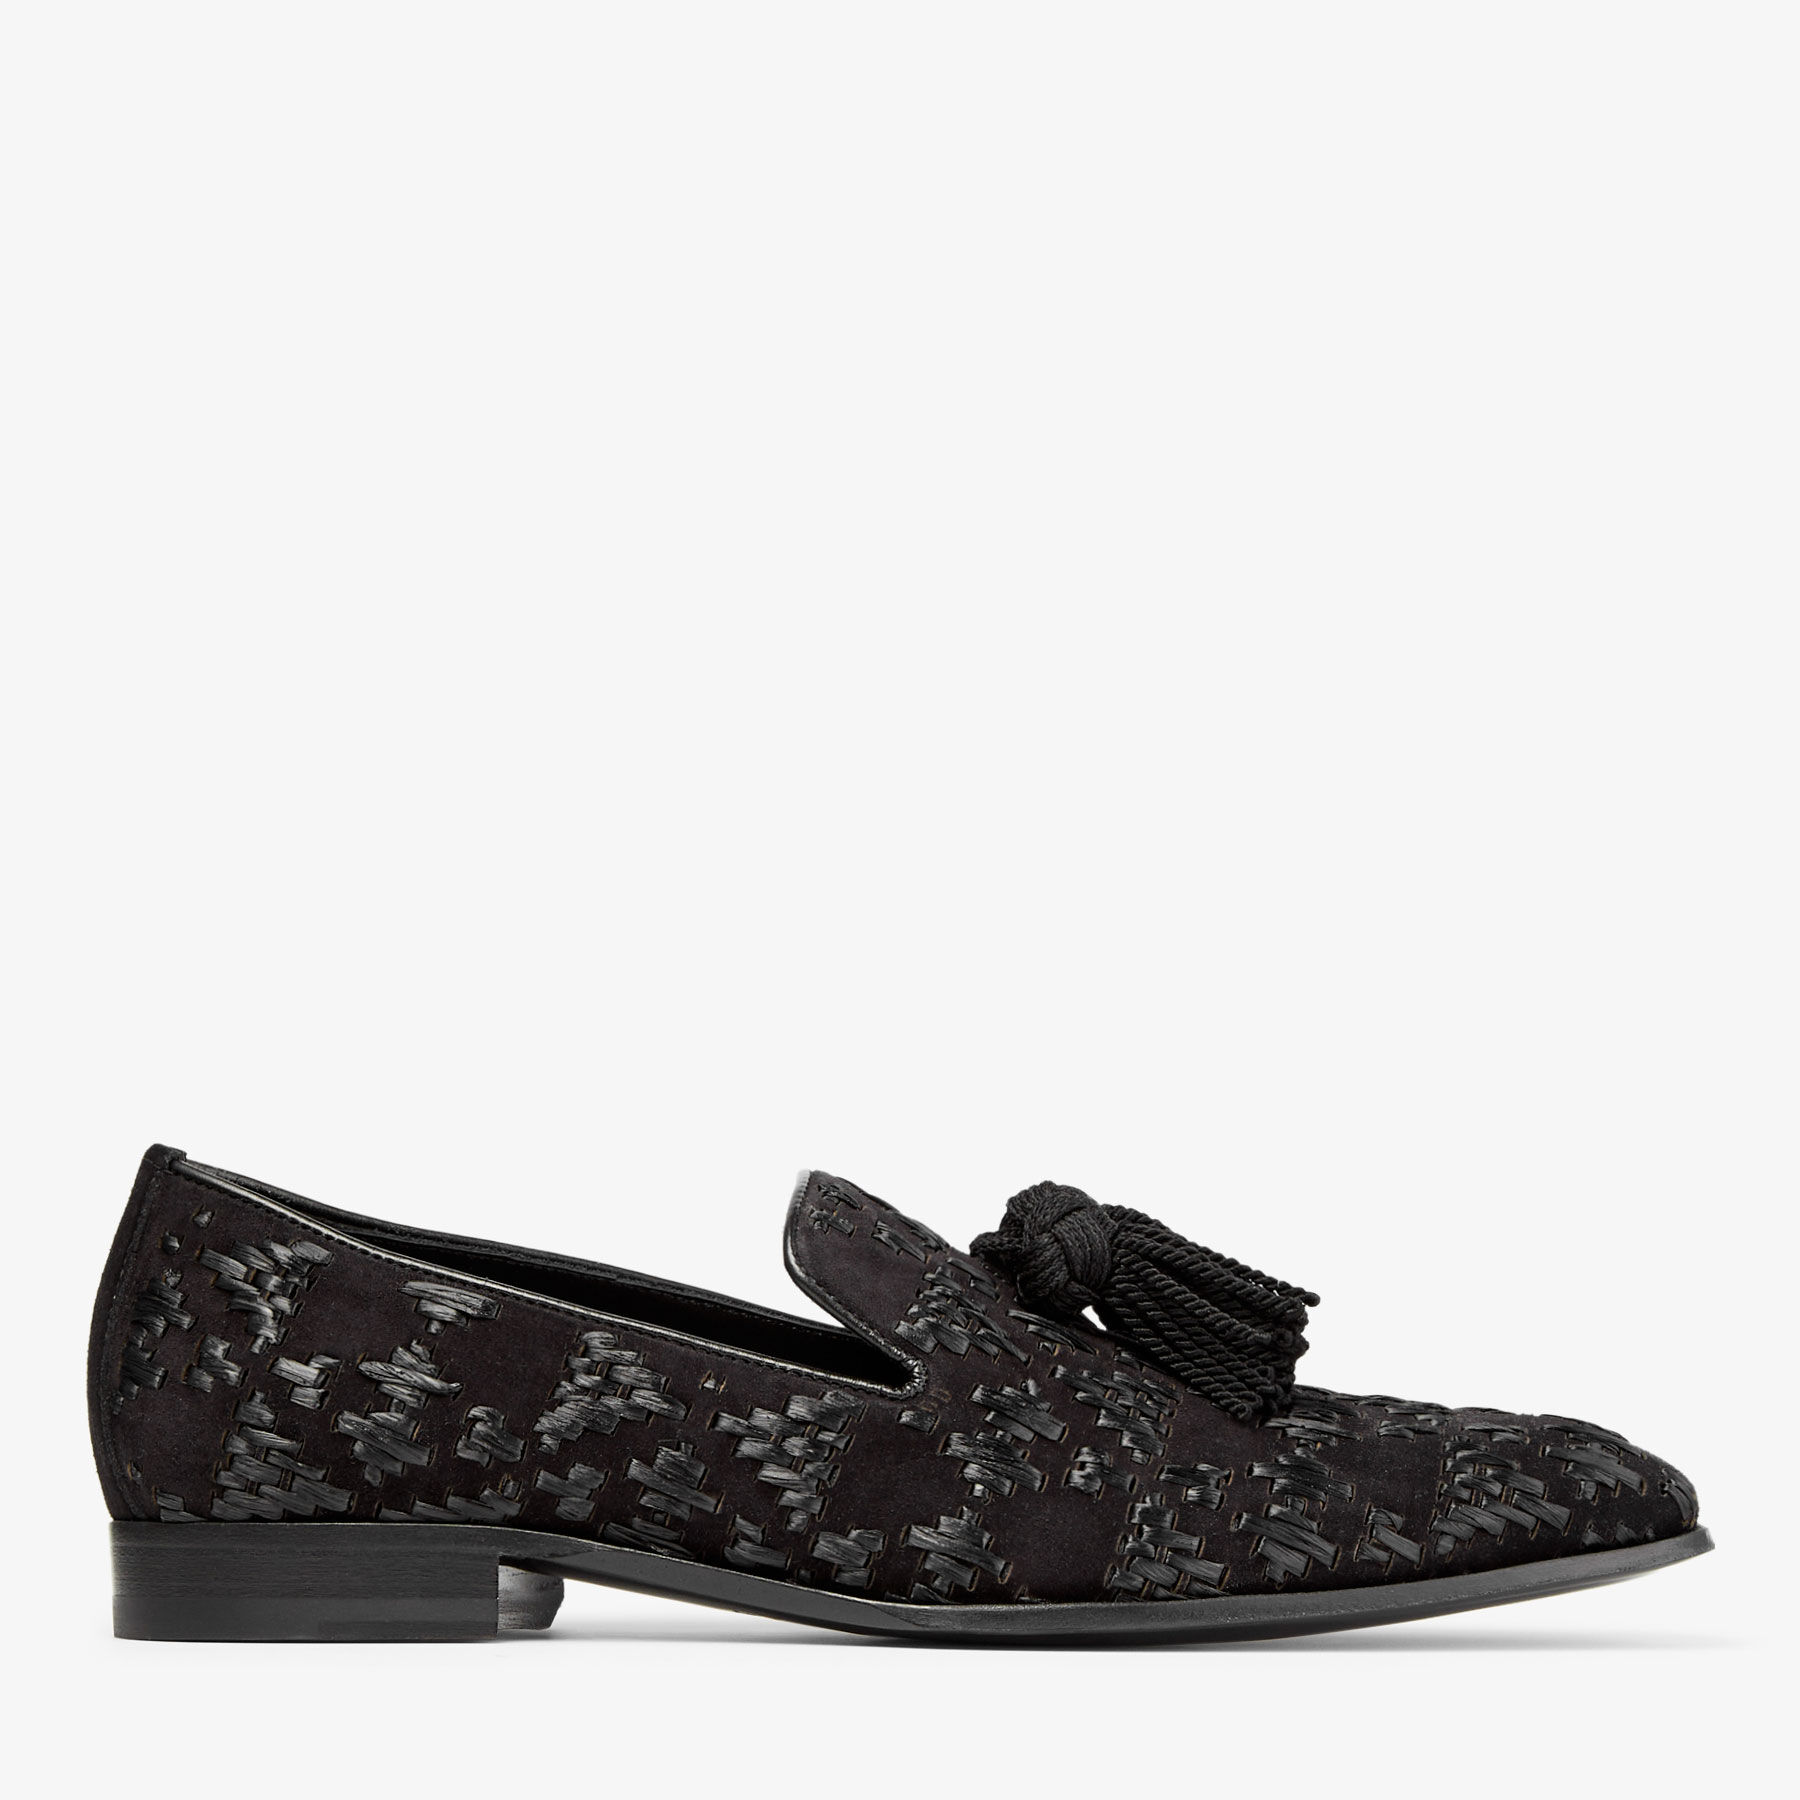 FOXLEY/M | Black Velvet Suede and Raffia Slip-On Shoes with Tassel